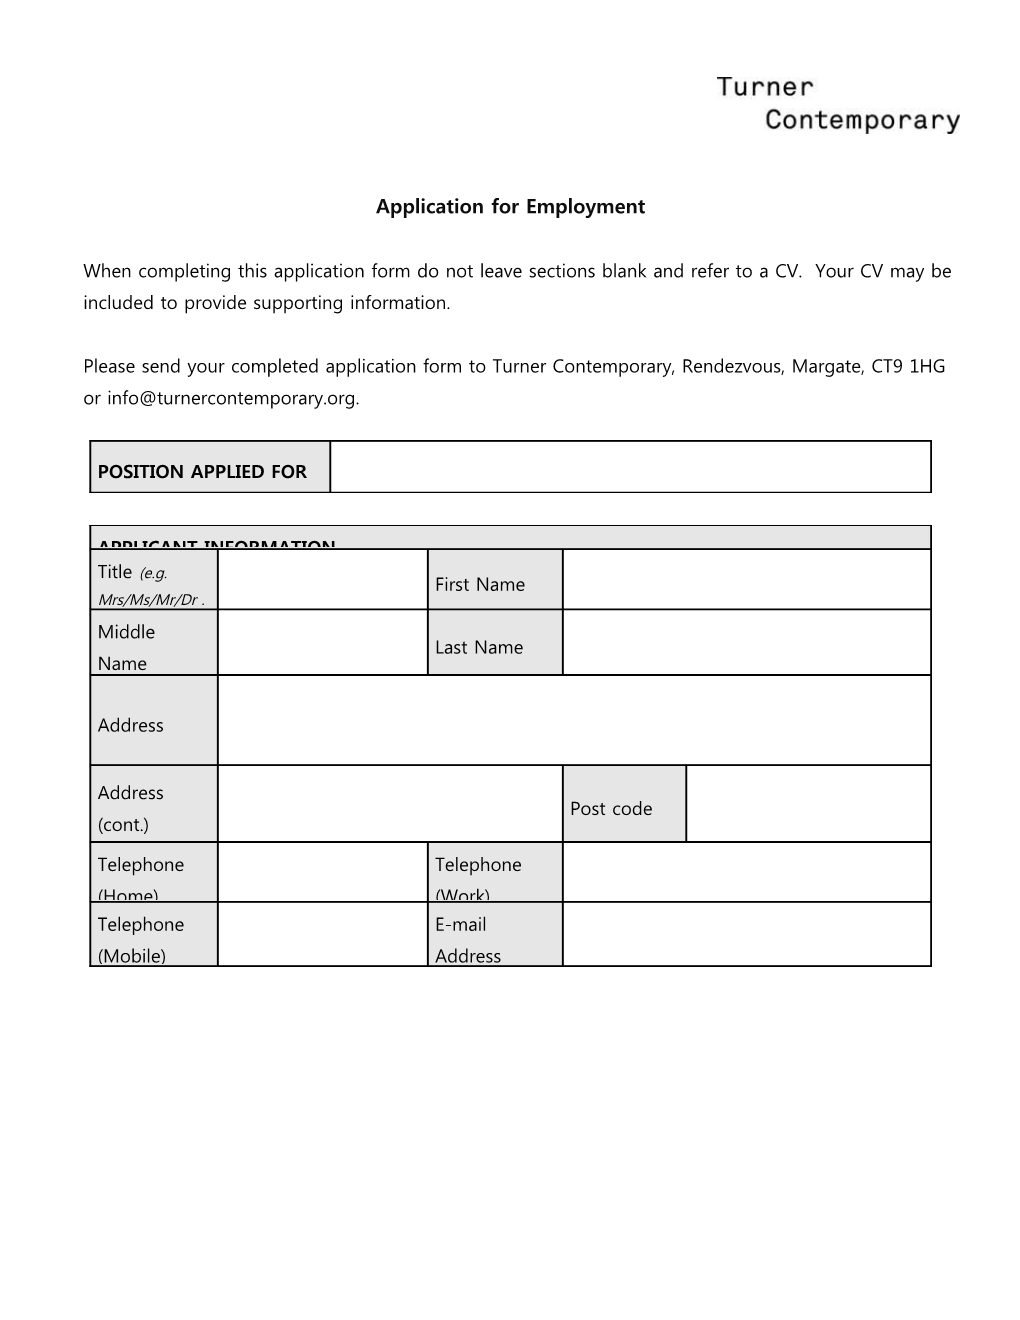 Application for Employment s89